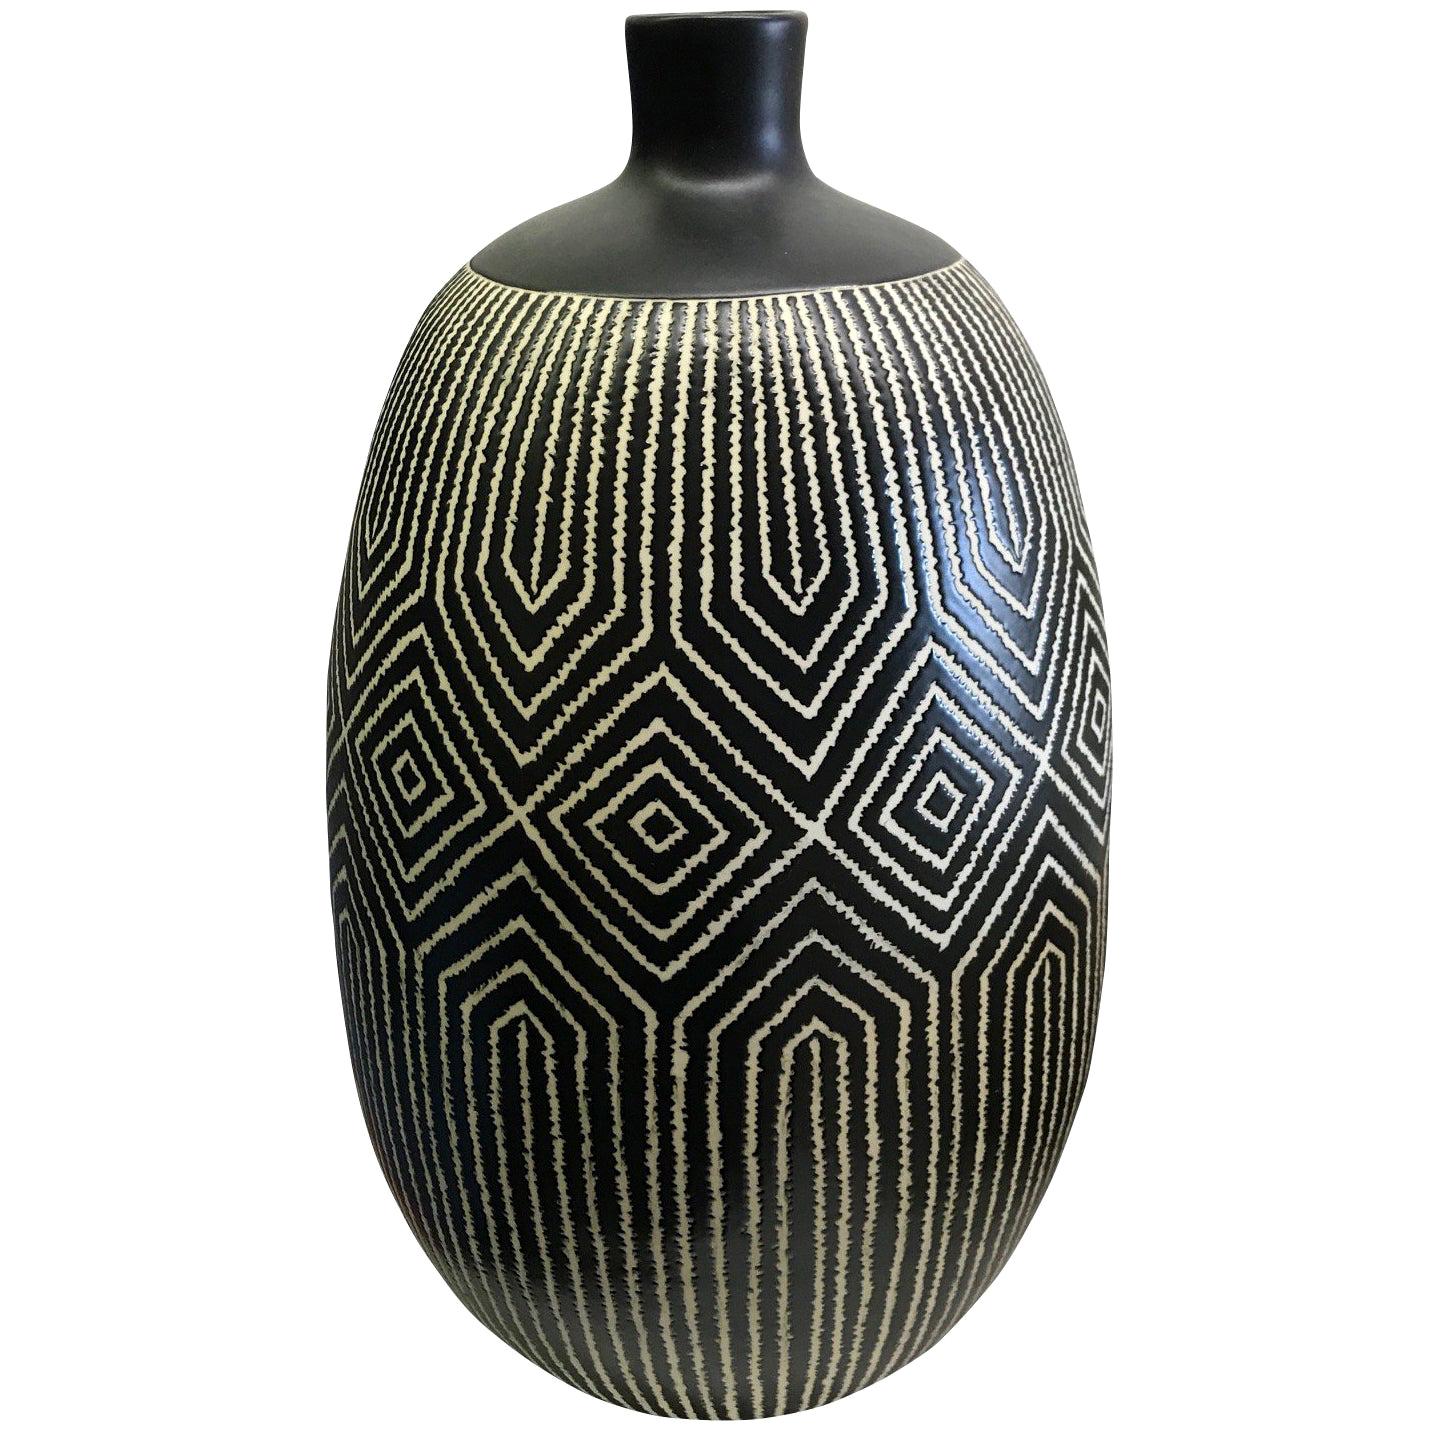 Black and White Patterned Vase, Thailand, Contemporary